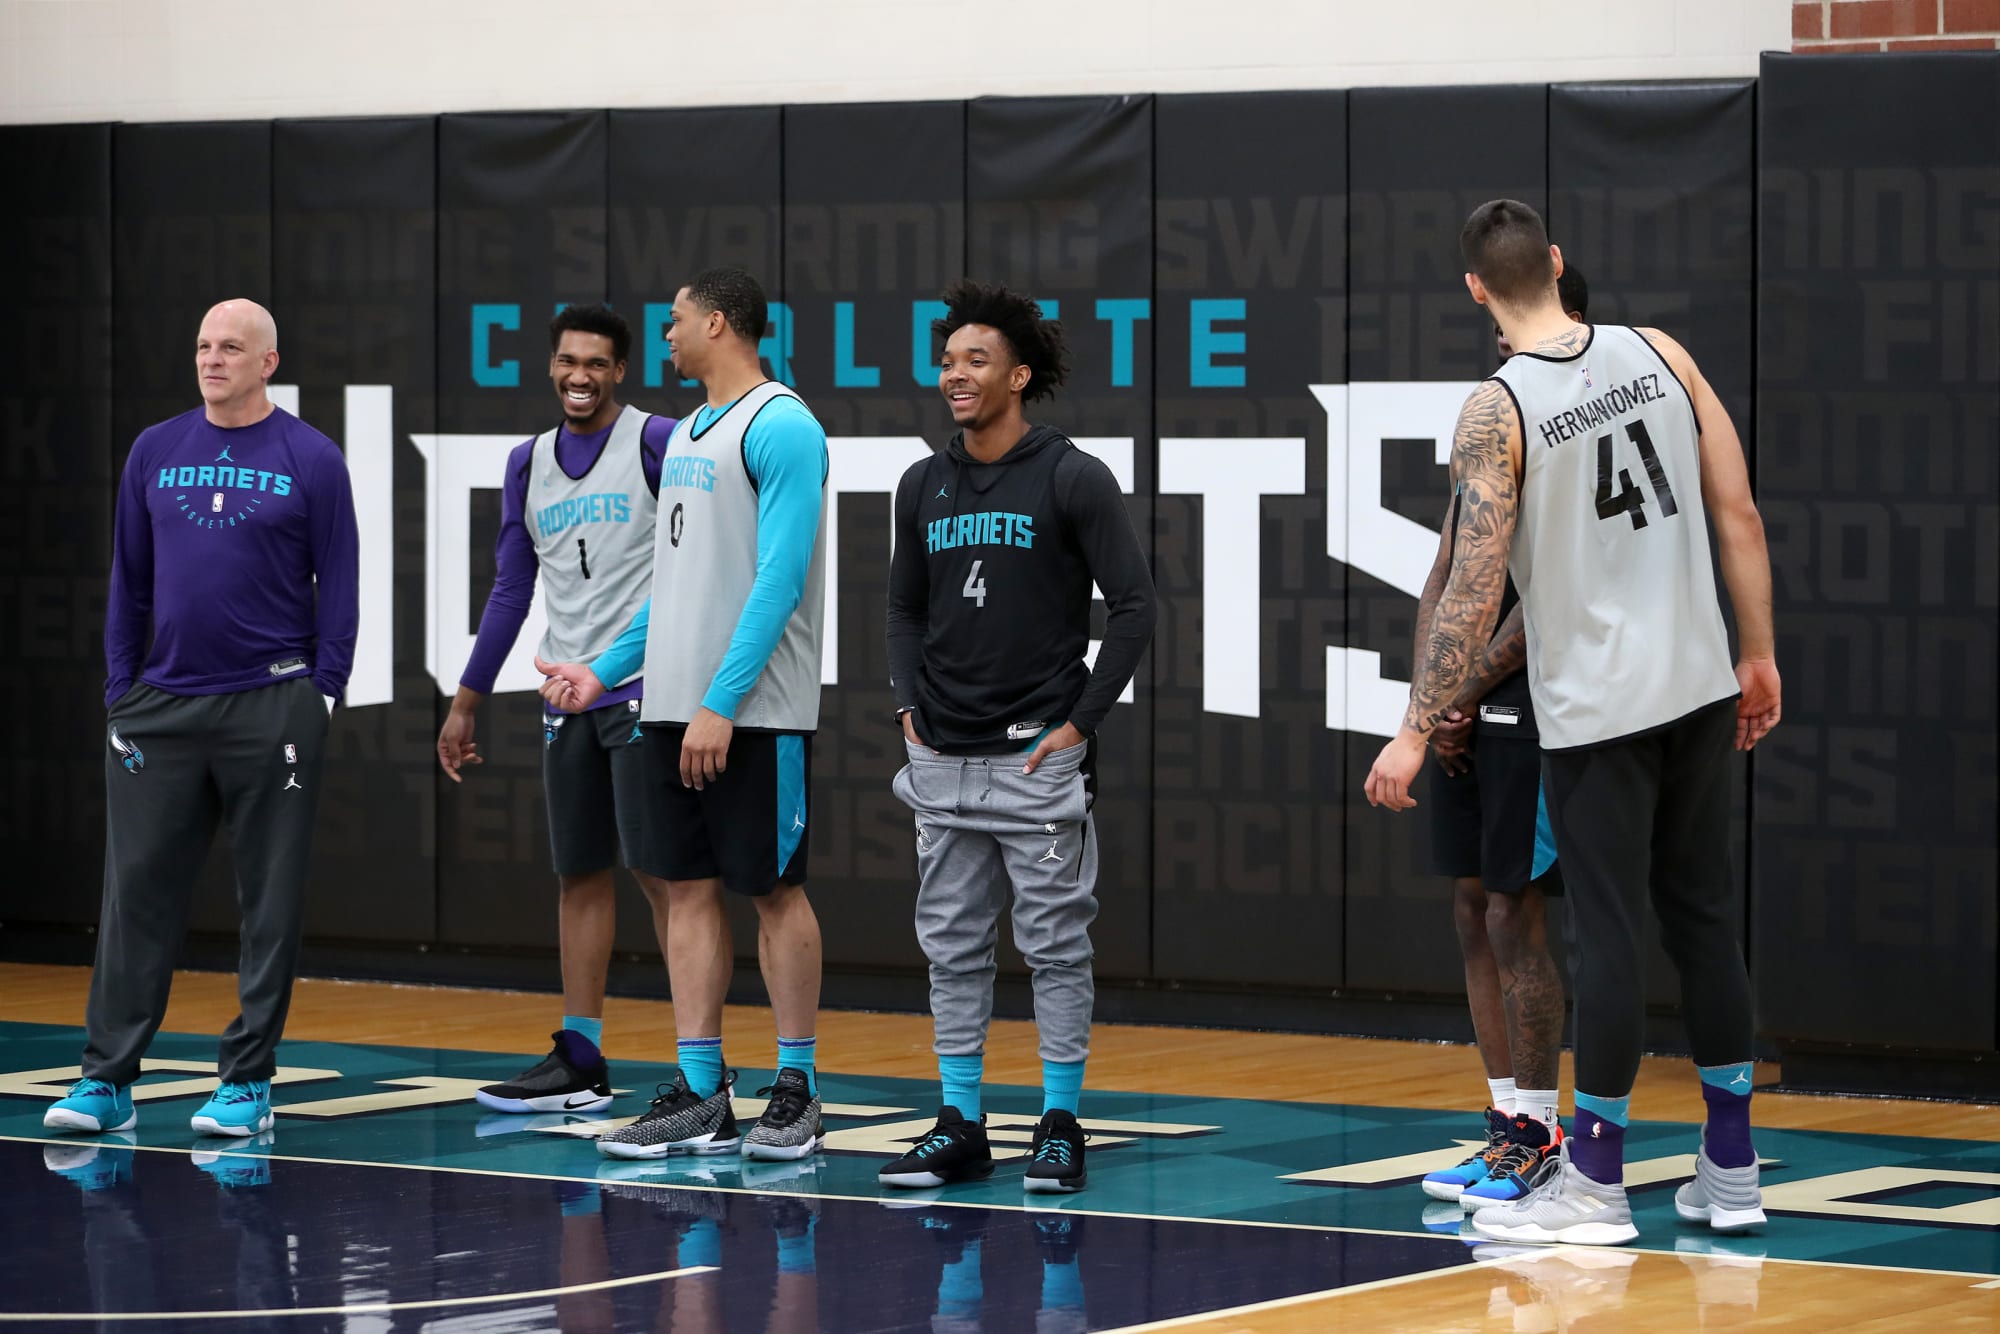 Charlotte Training Camp What's on the line for each player